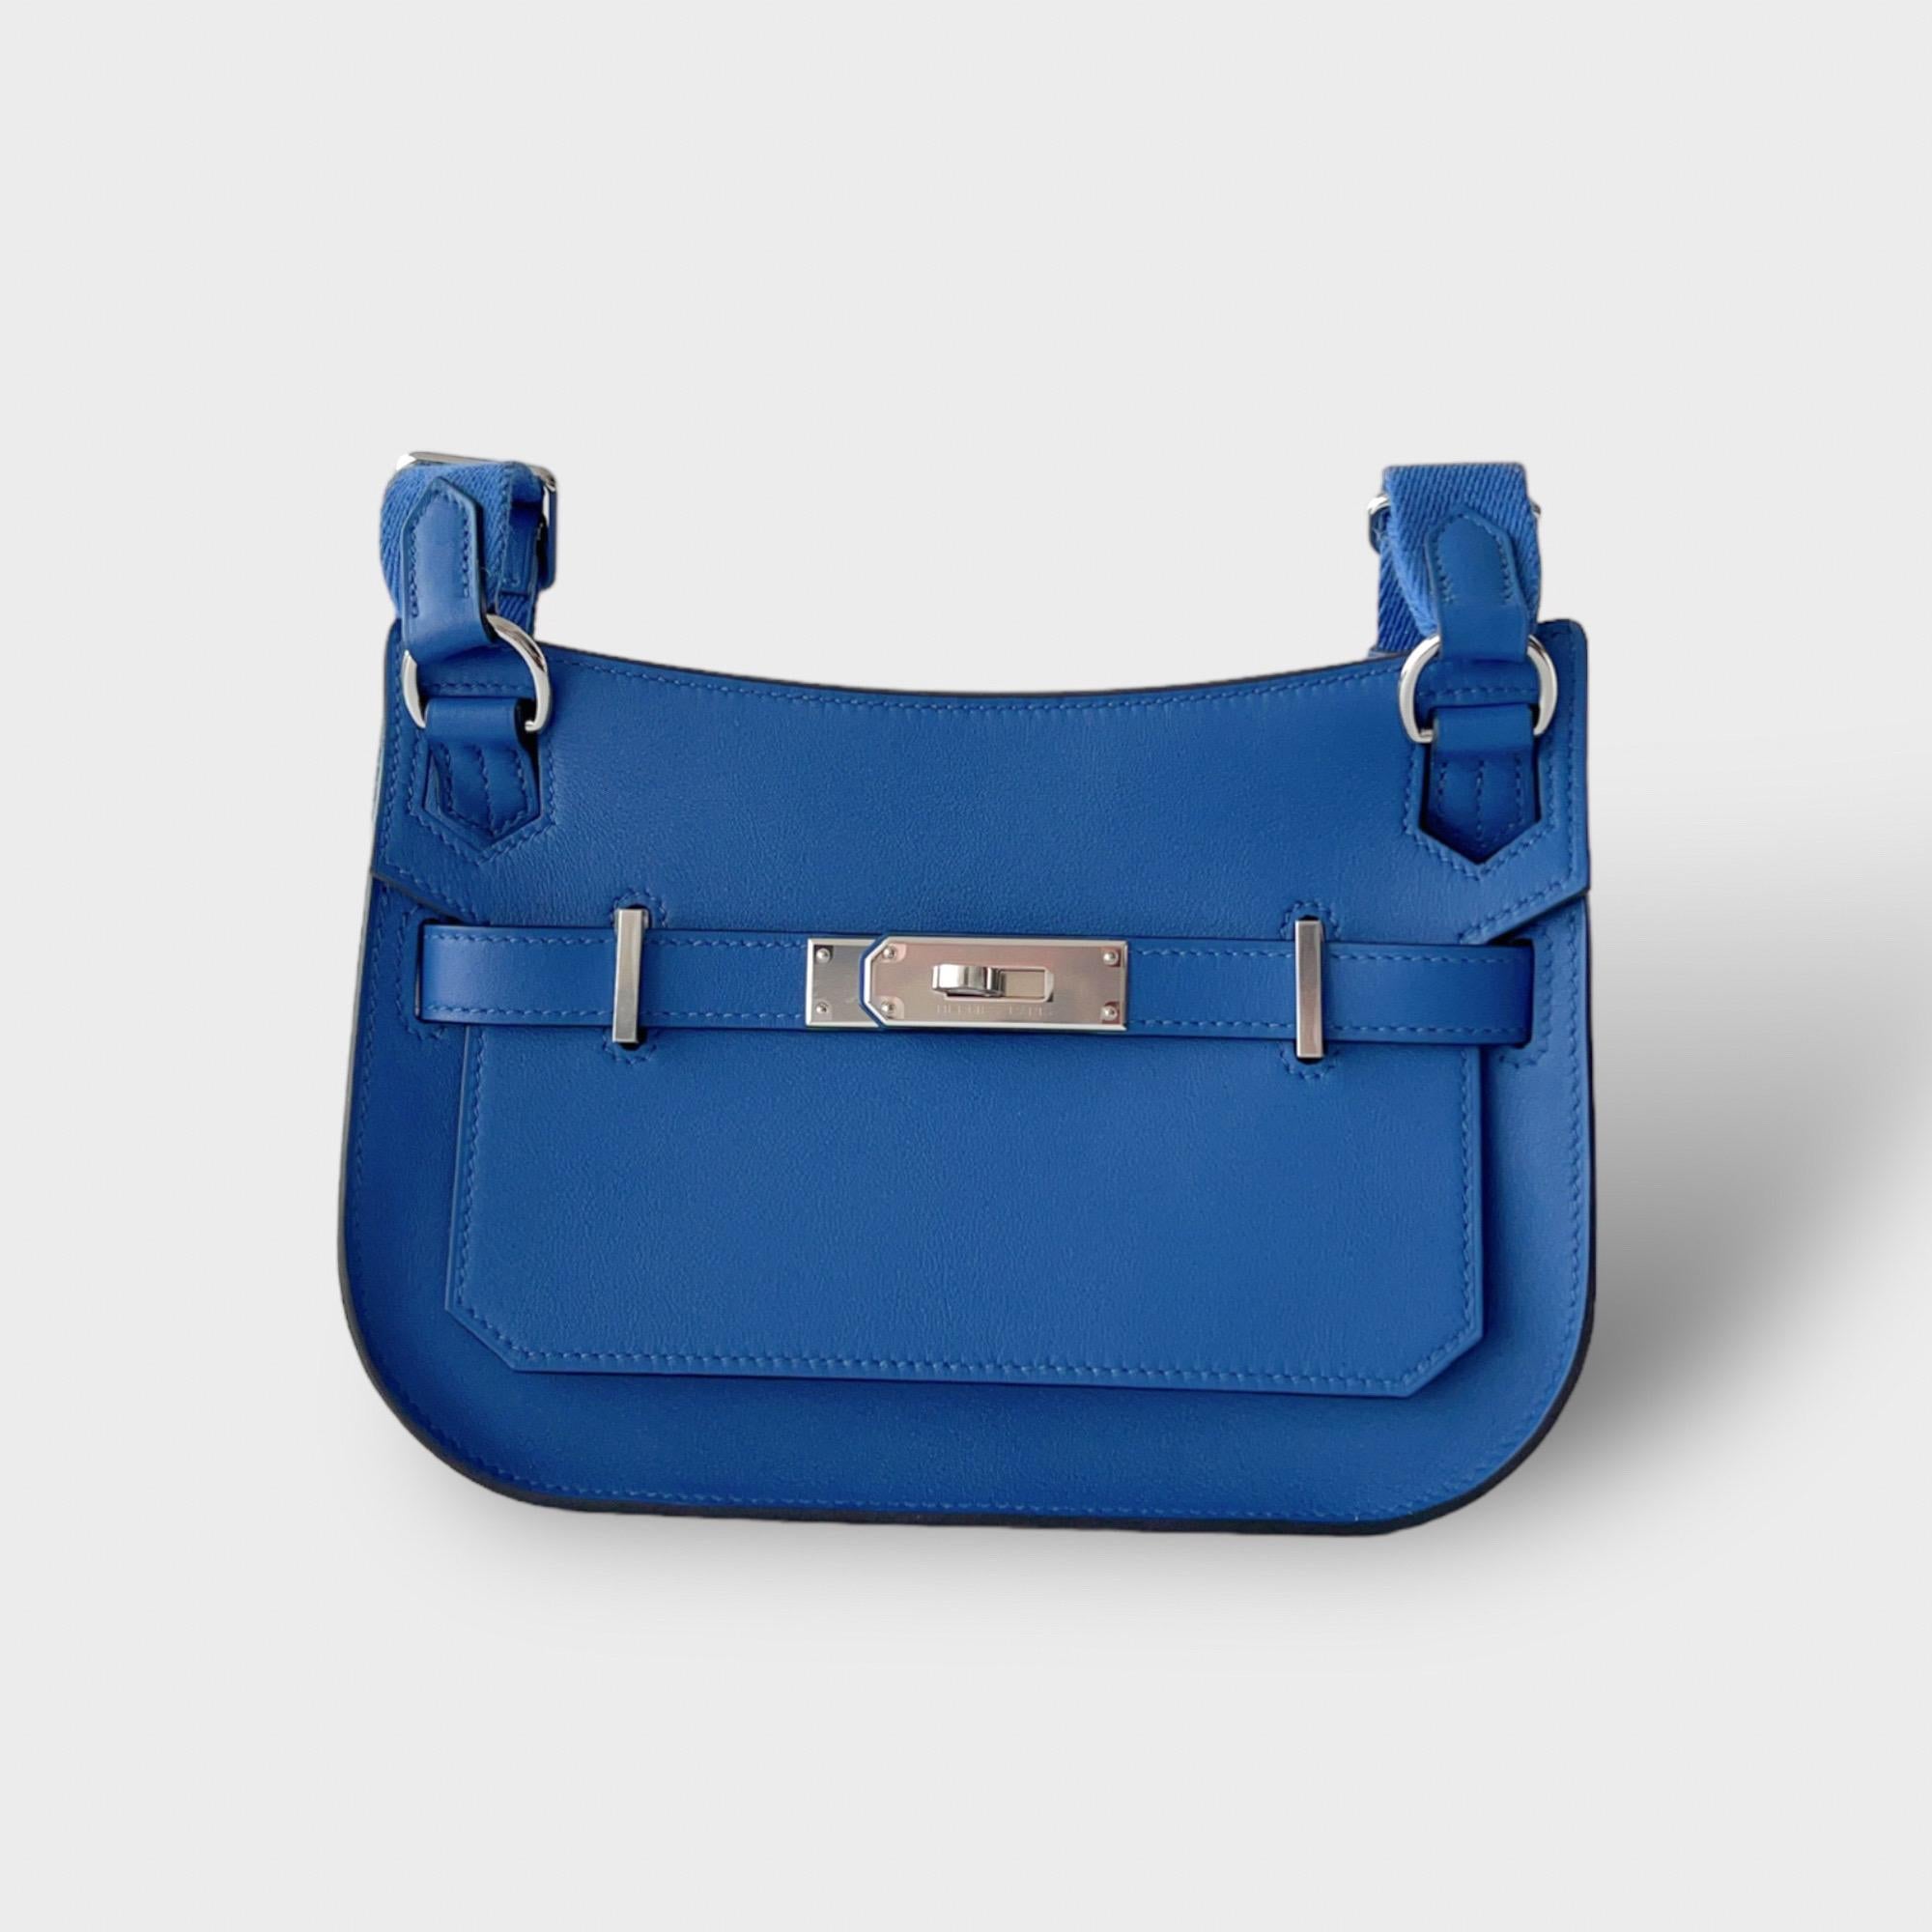 Shop this Hermes Jypsiere Mini Bag that just speaks elegance in a more sporty and casual way. It was handcrafted in 2023 (B) from swift leather. It comes in a soft blue known as Bleu France which is matched by Palladium hardware. It comes with a